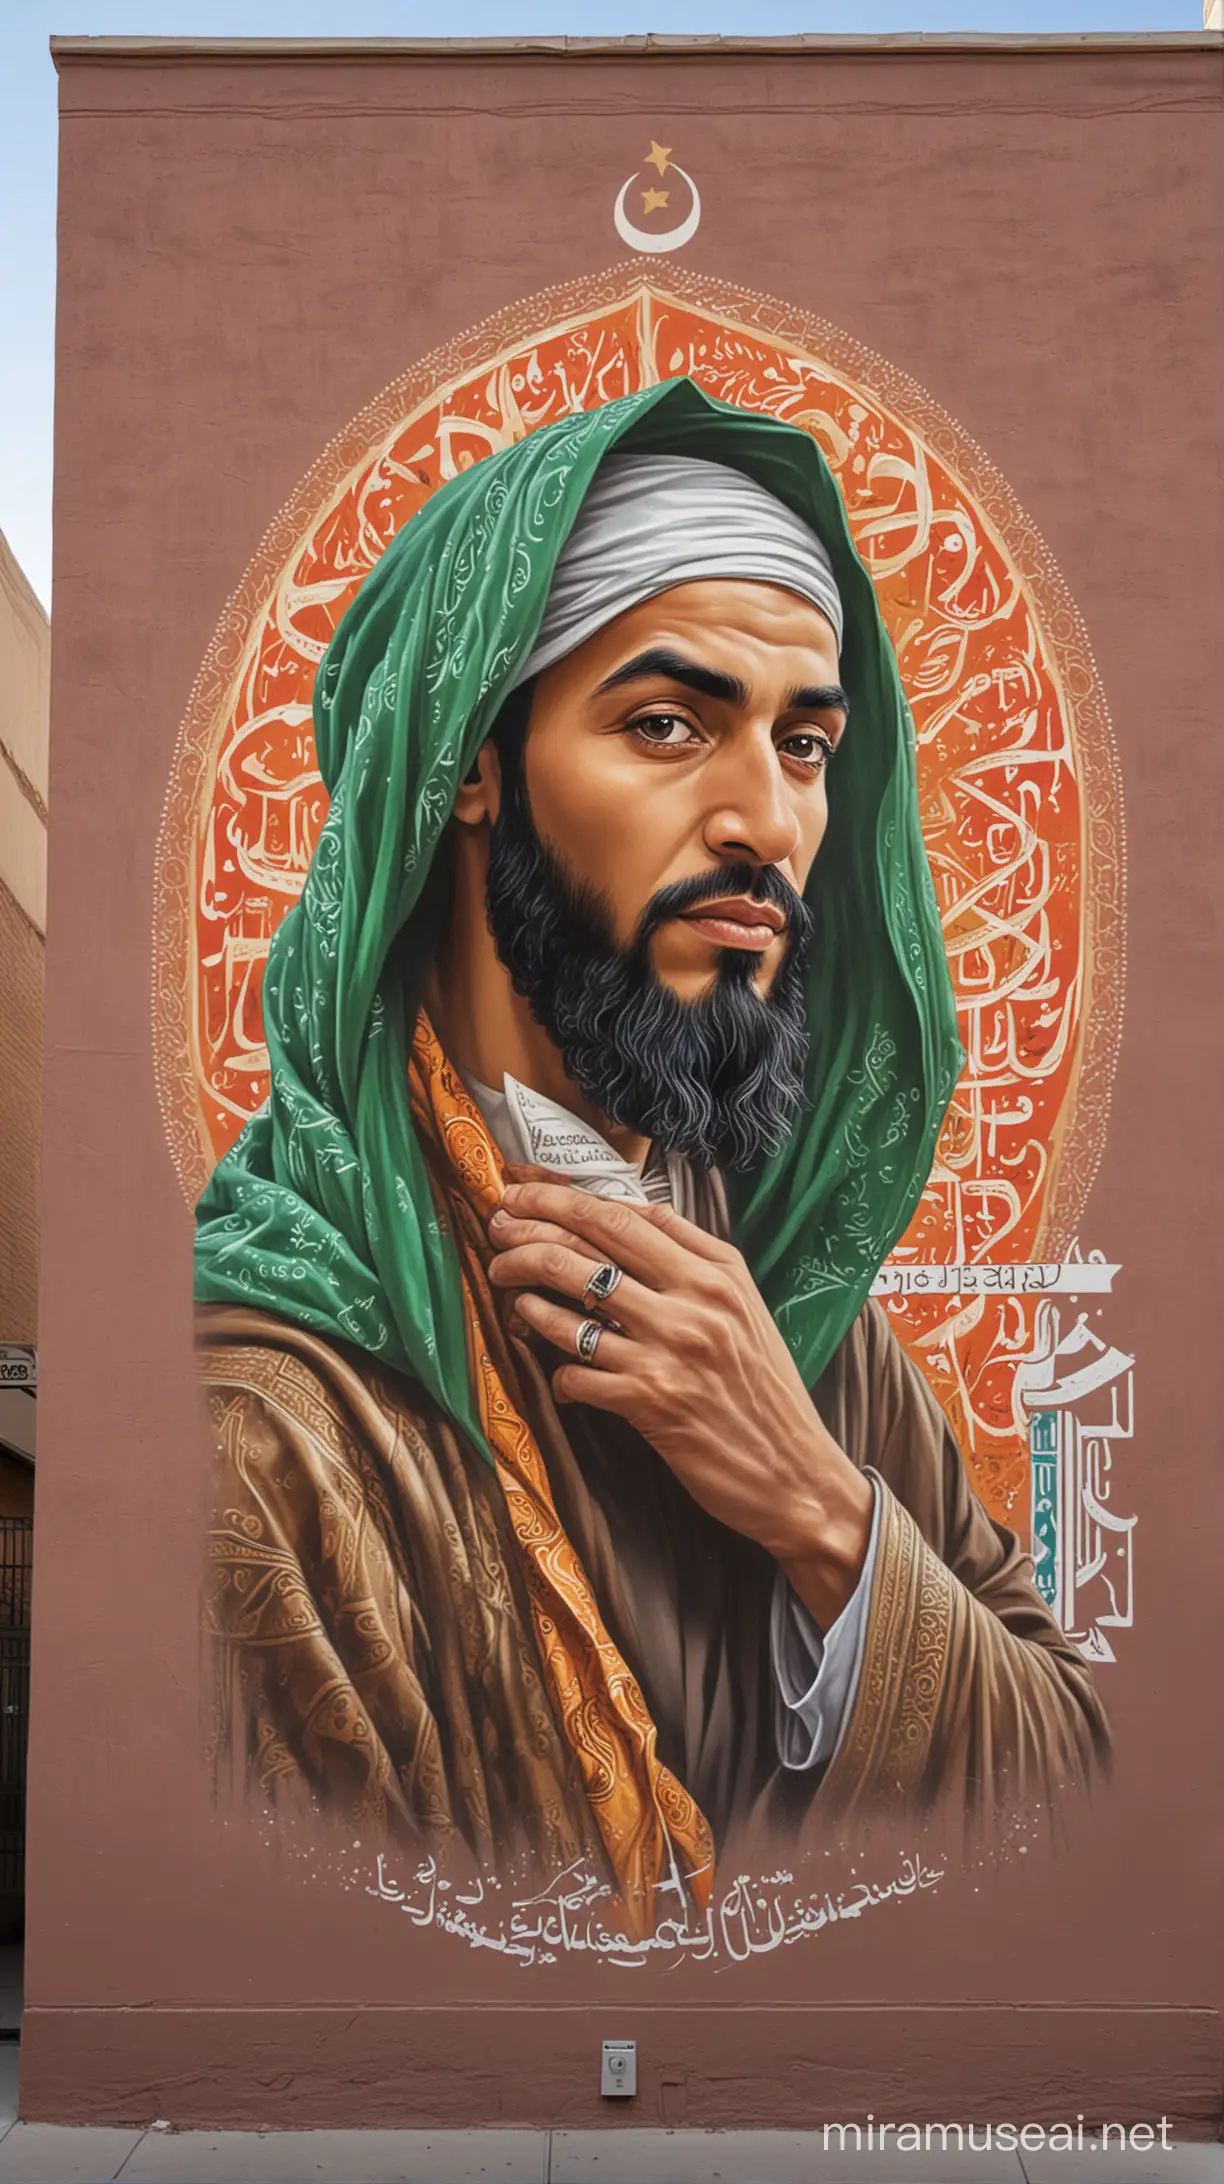 Mural Depicting Prophet Muhammads Teachings on Equality with Zayd ibn Harithah Adoption